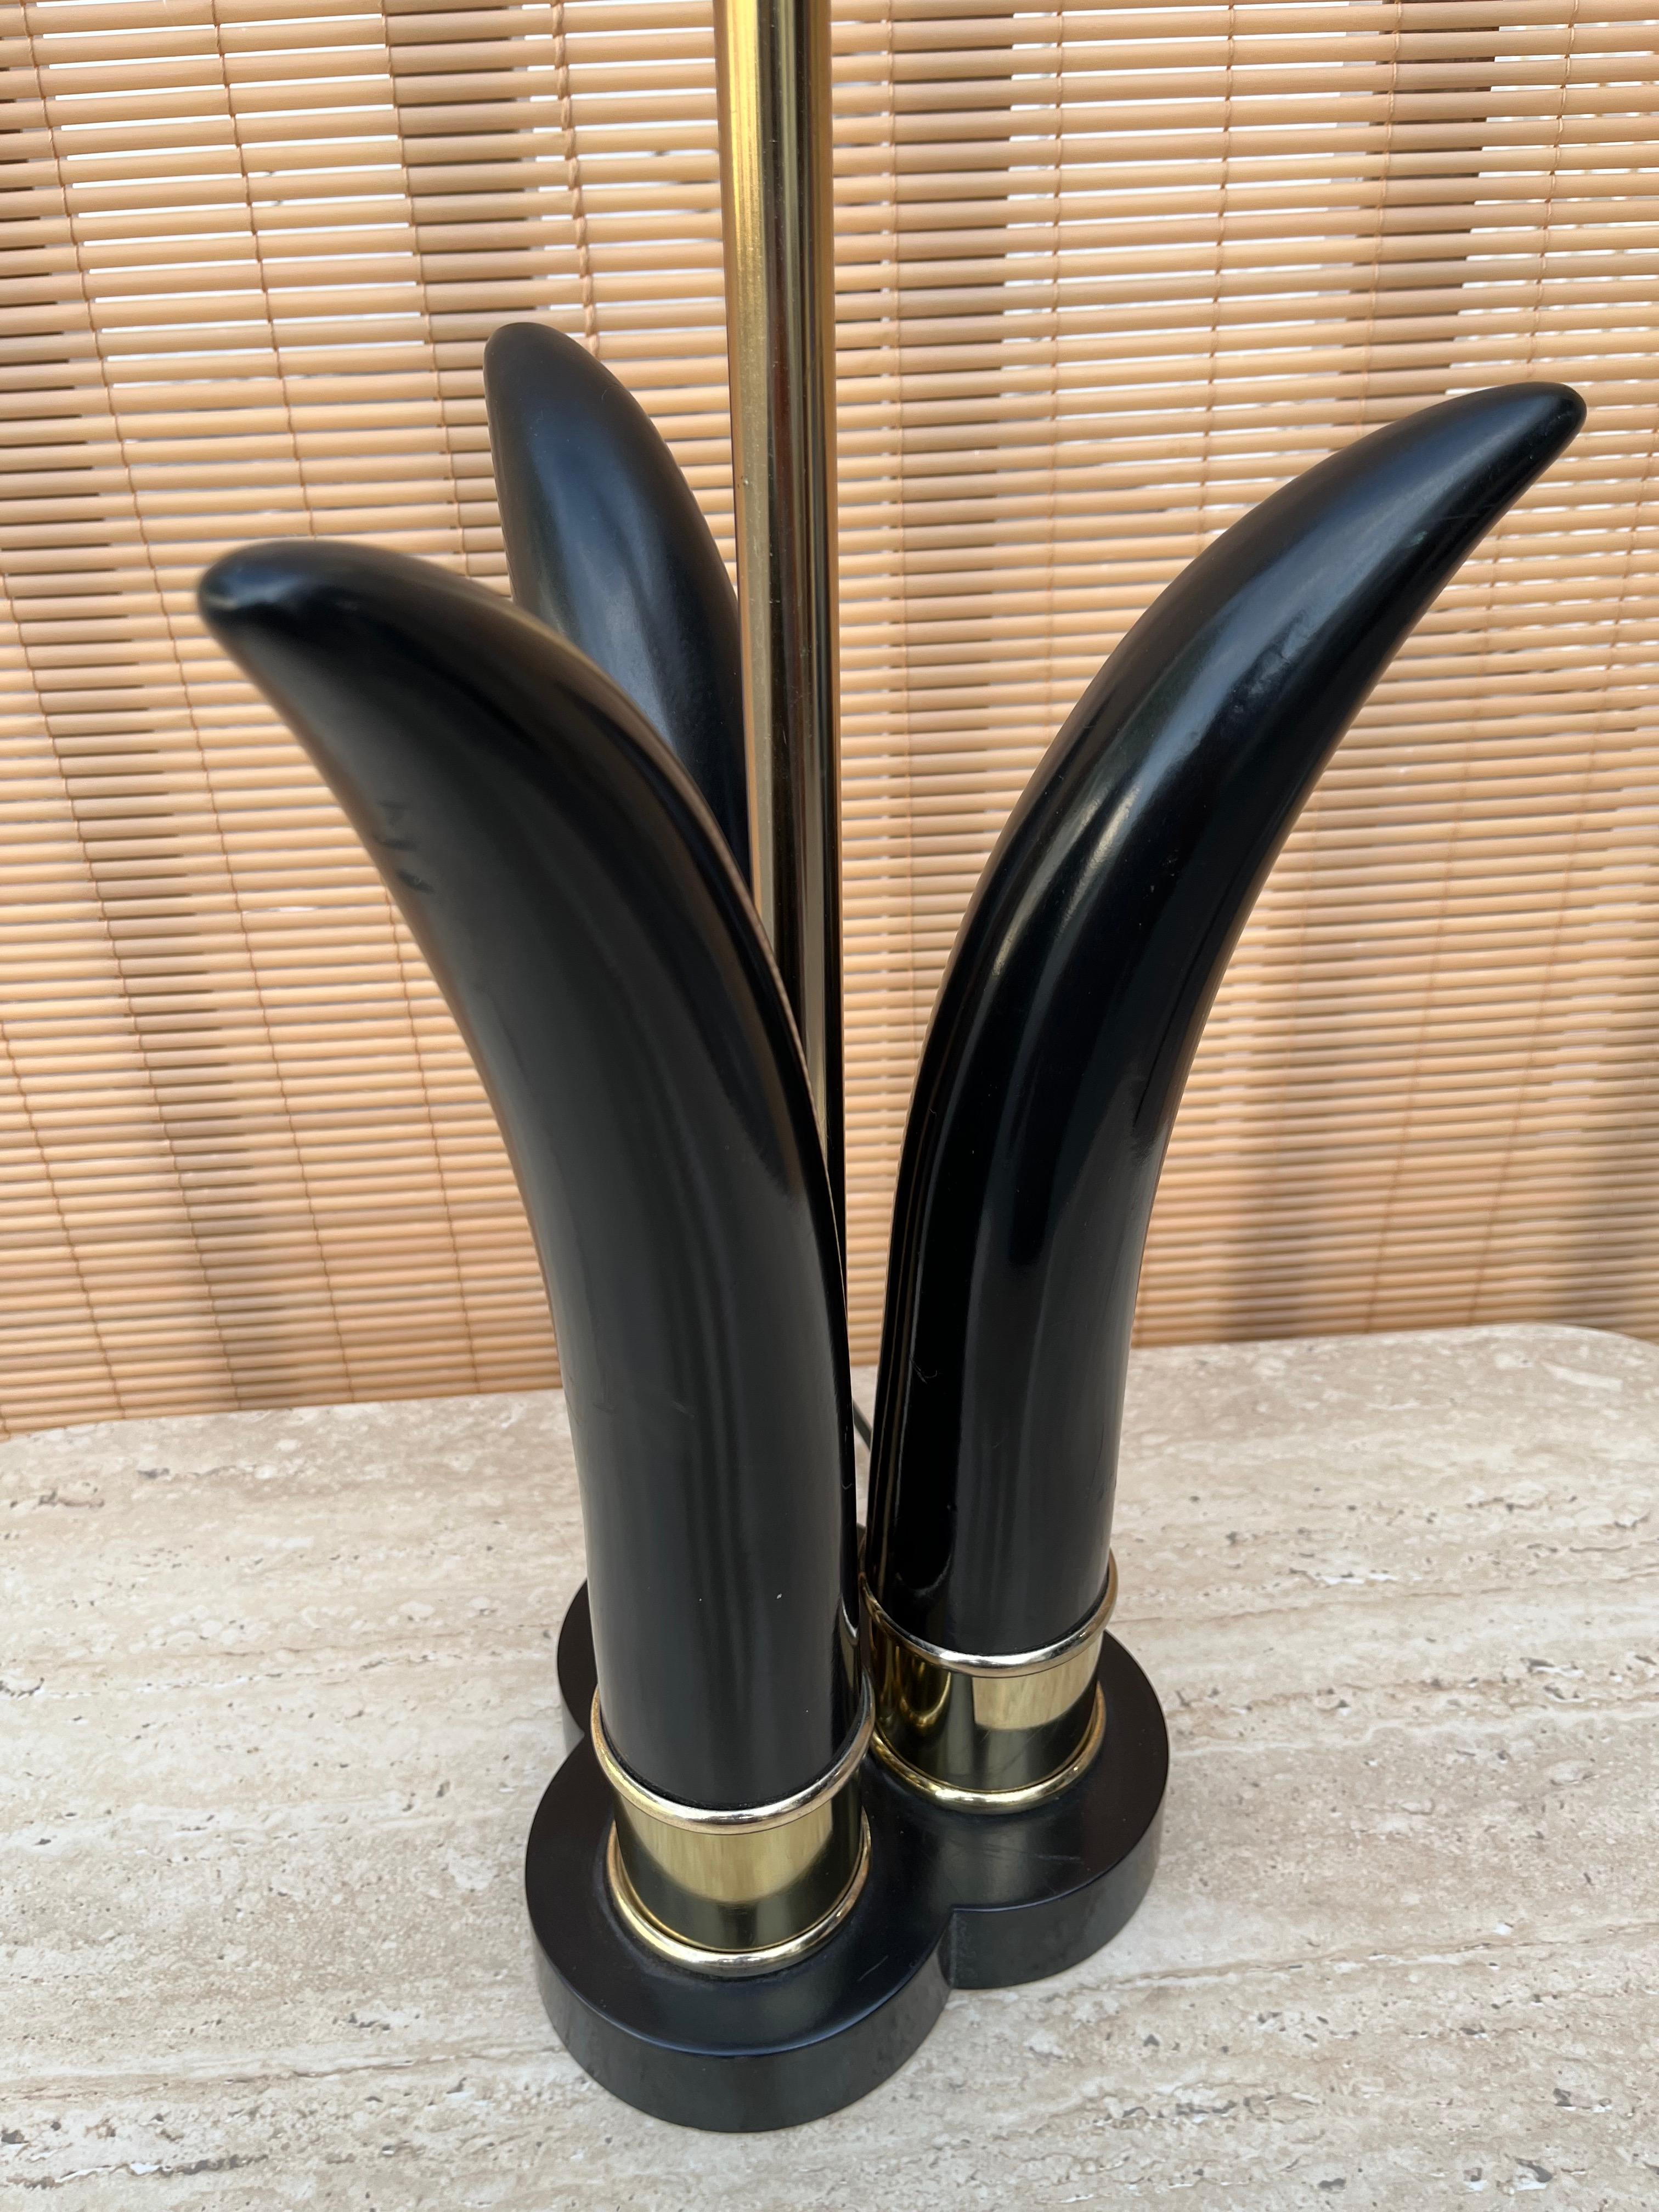 Pair of Mid-Century Modern Sculptural Black and Brass Table Lamps For Sale 4